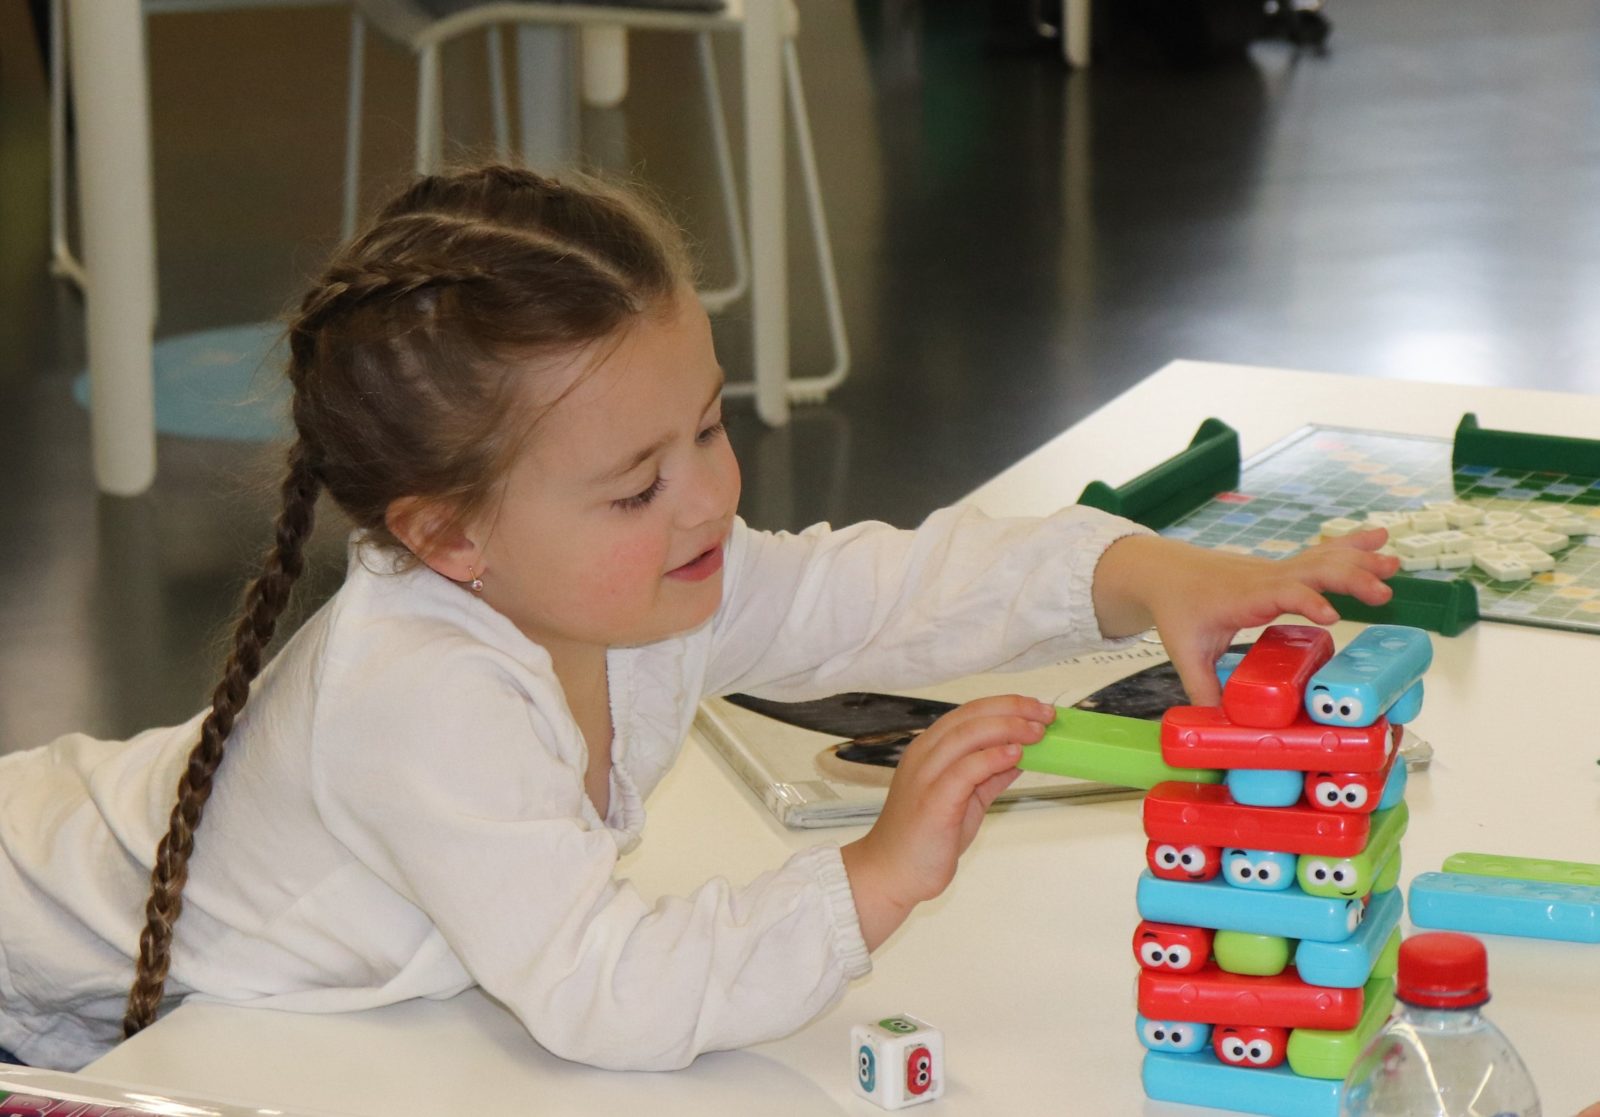 A young girl is playing jenga